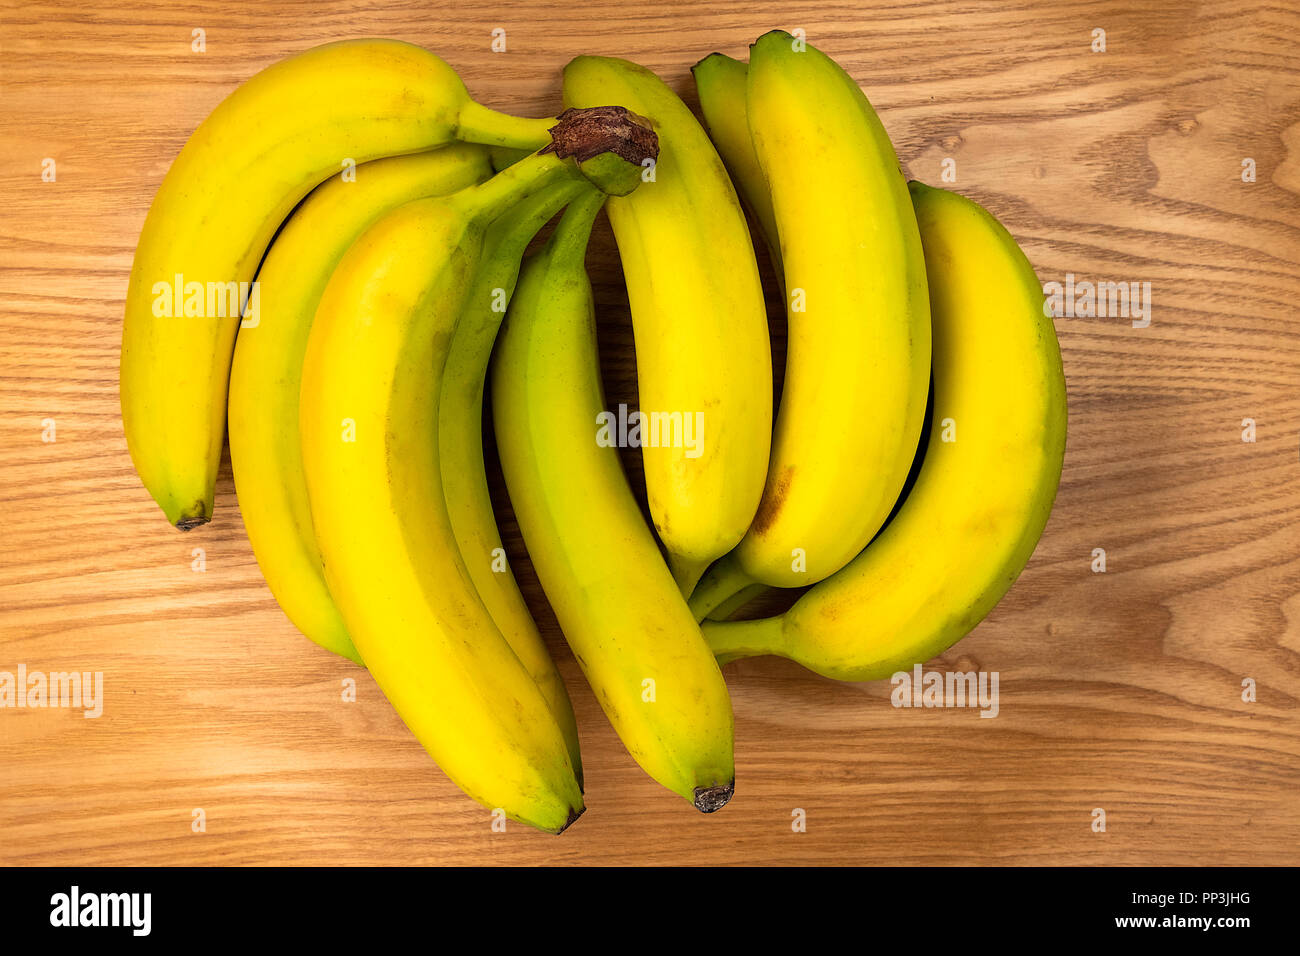 bananas over an wooden plate Stock Photo